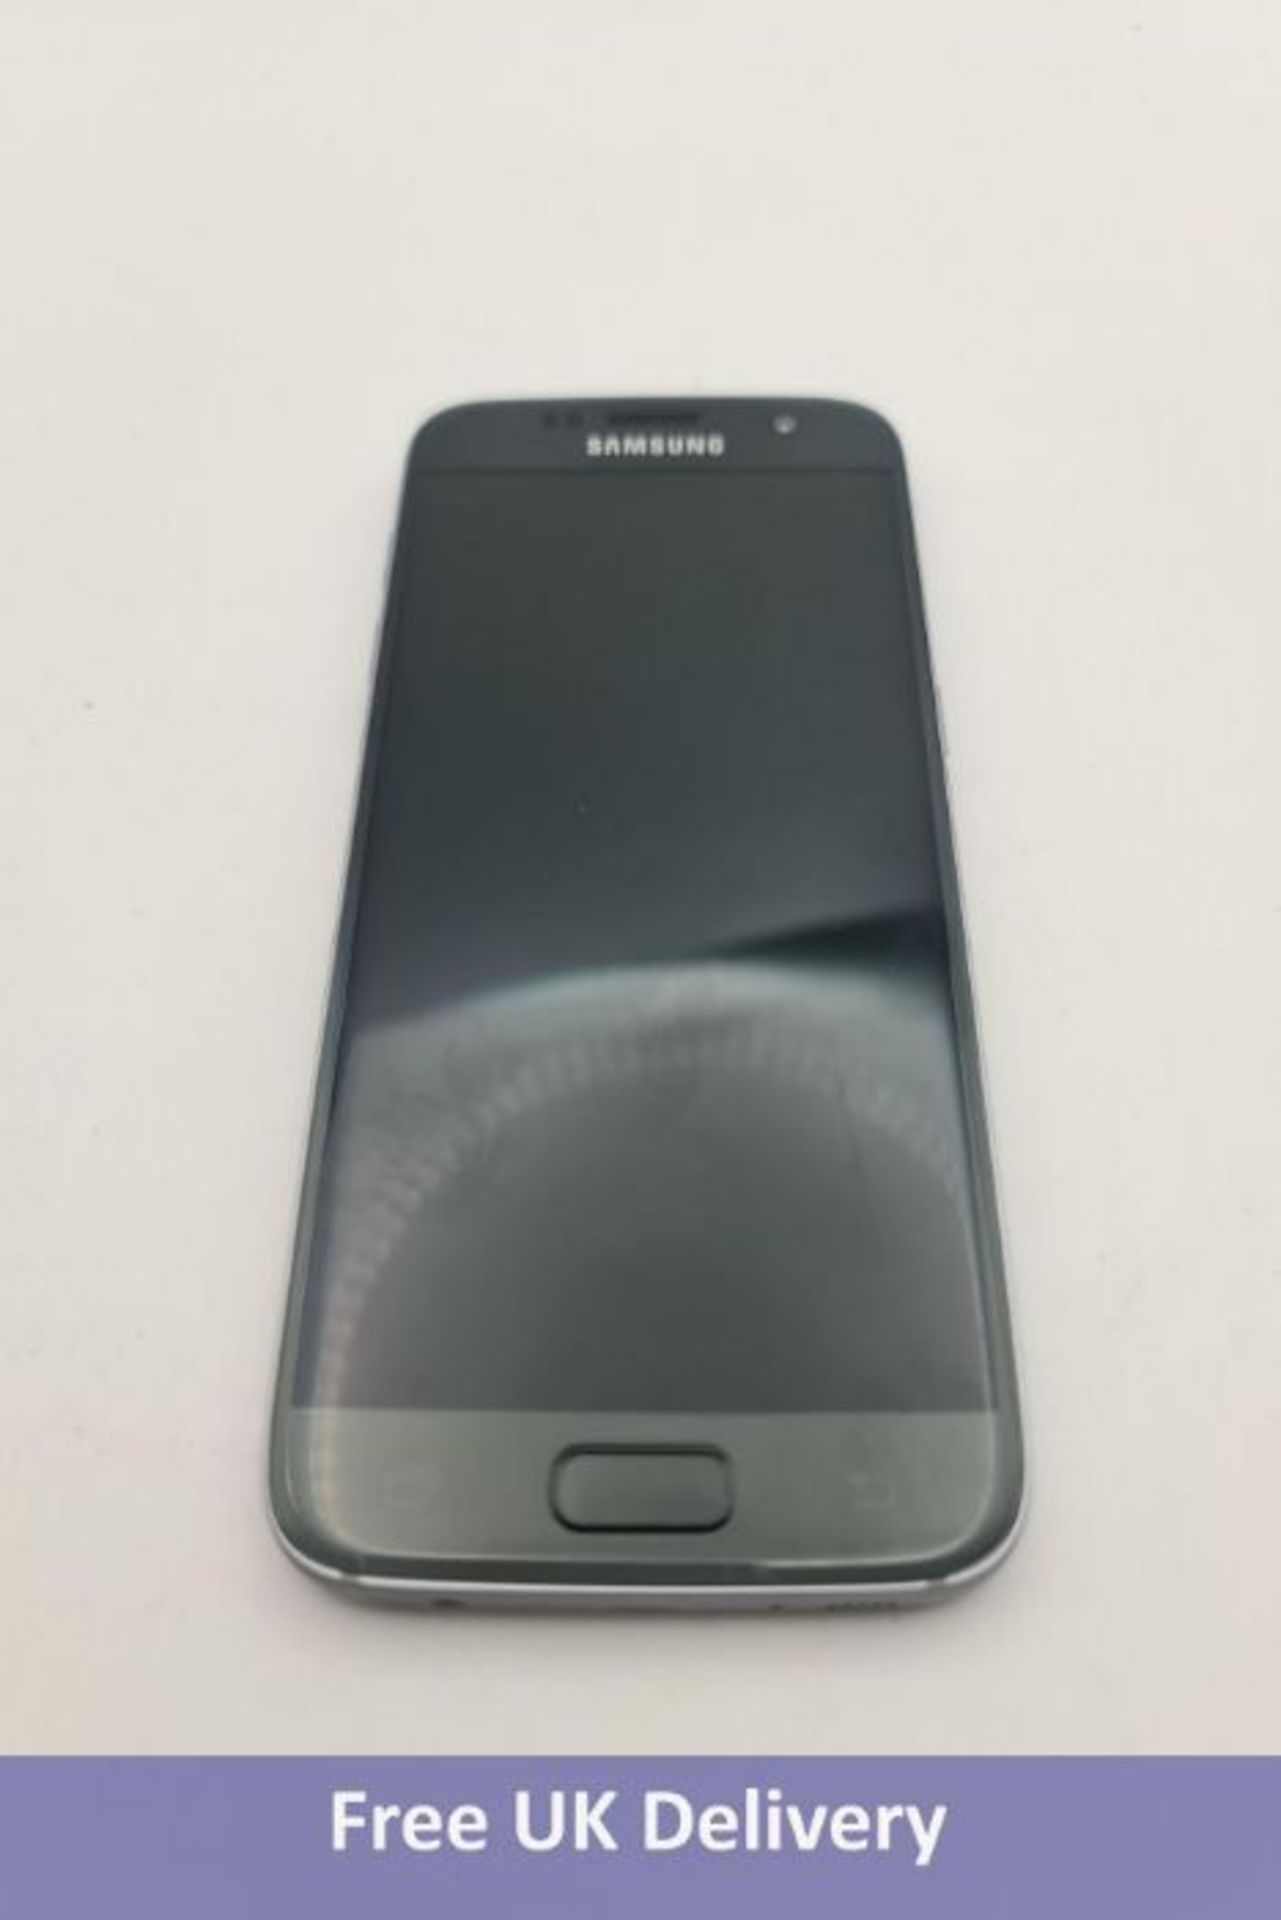 Samsung Galaxy S7 Android Mobile Phone, 32GB, AT&T logo on rear. Used, no box or accessories. Checkm